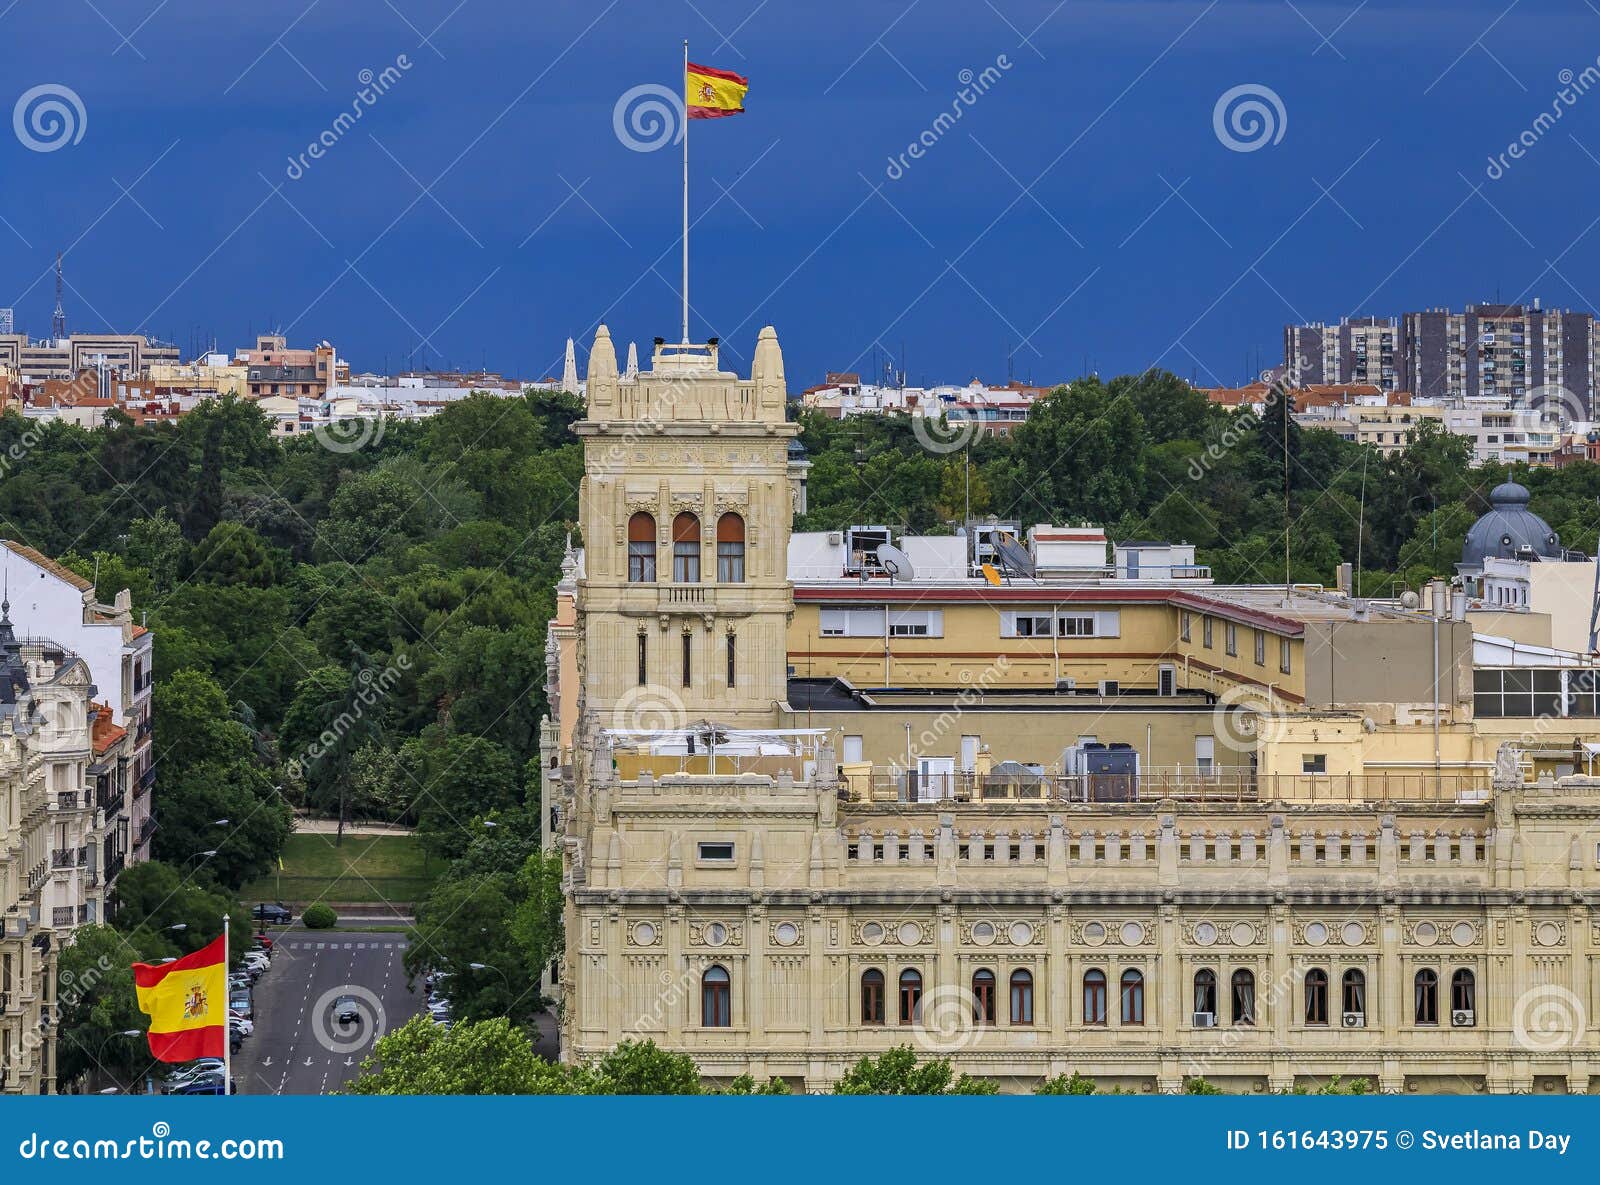 aerial view of the ornate building of cuartel general de la armada or headquarters of the spanish navy in madrid, spain